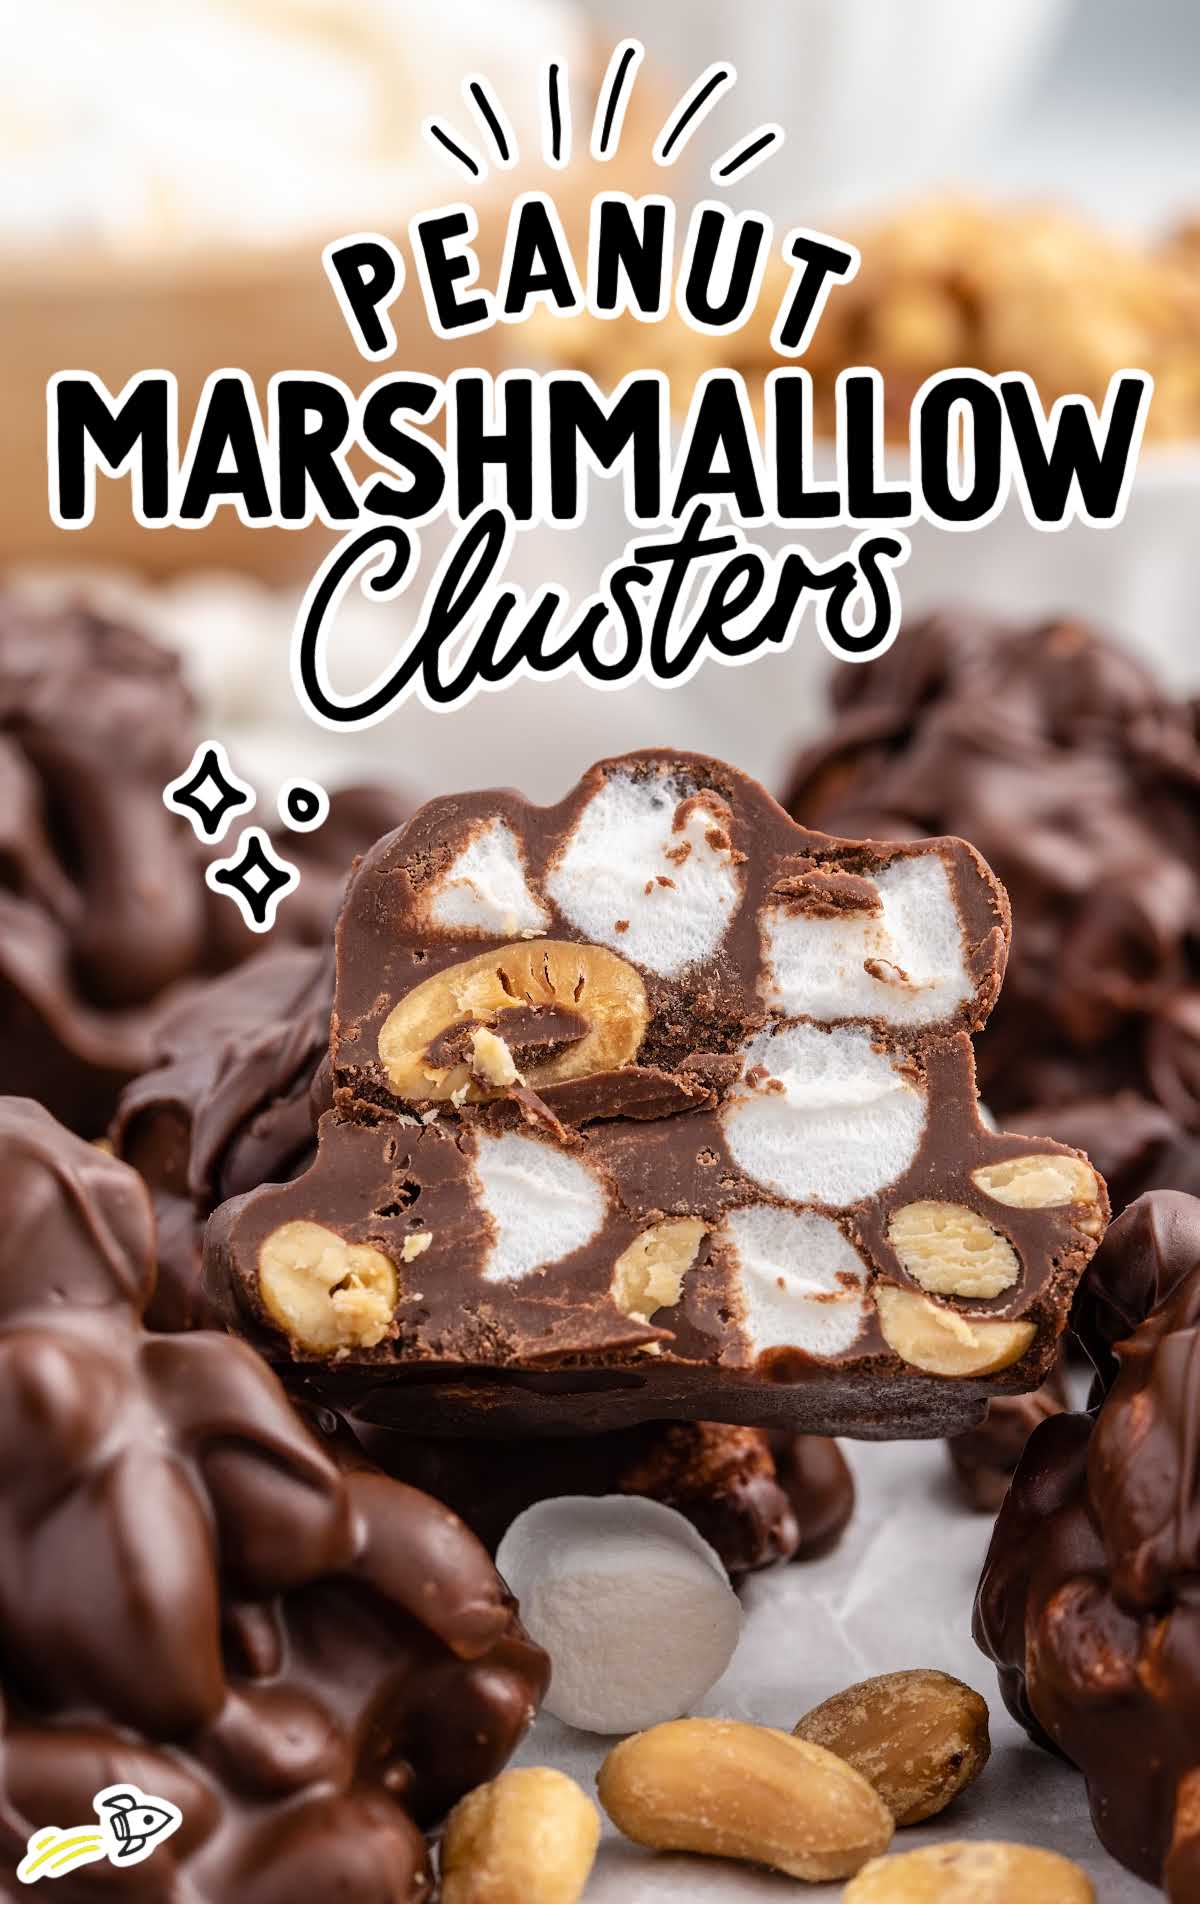 a close up shot of Peanut Marshmallow Cluster with a bite taken out of it